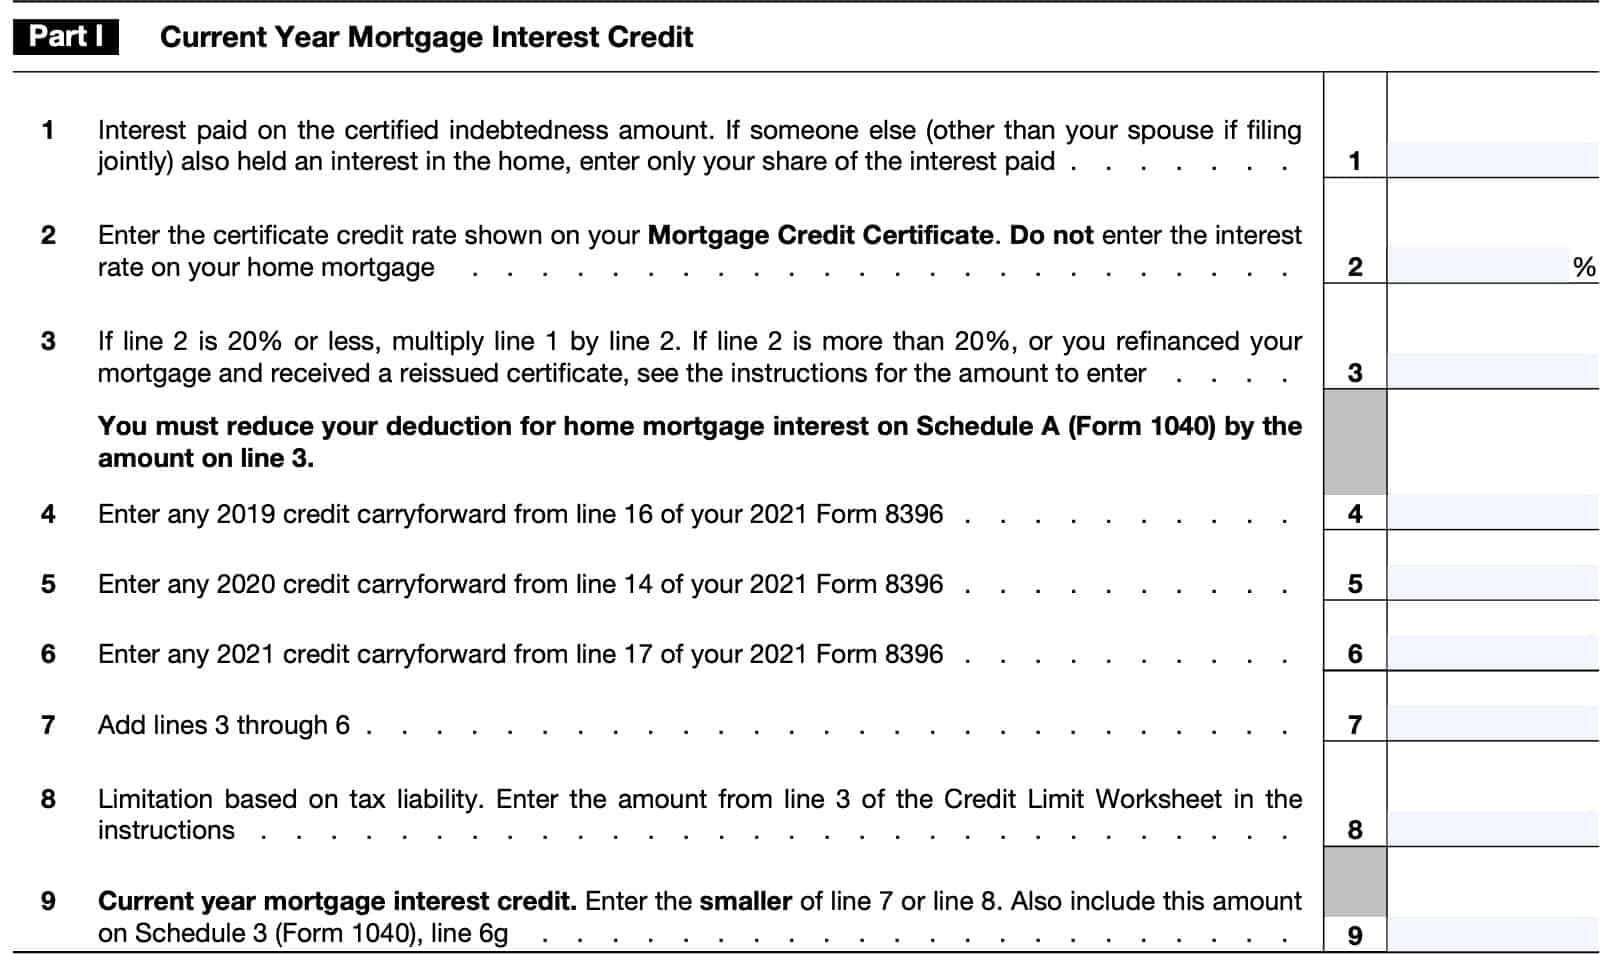 Form 8396 part I: current year mortgage interest credit